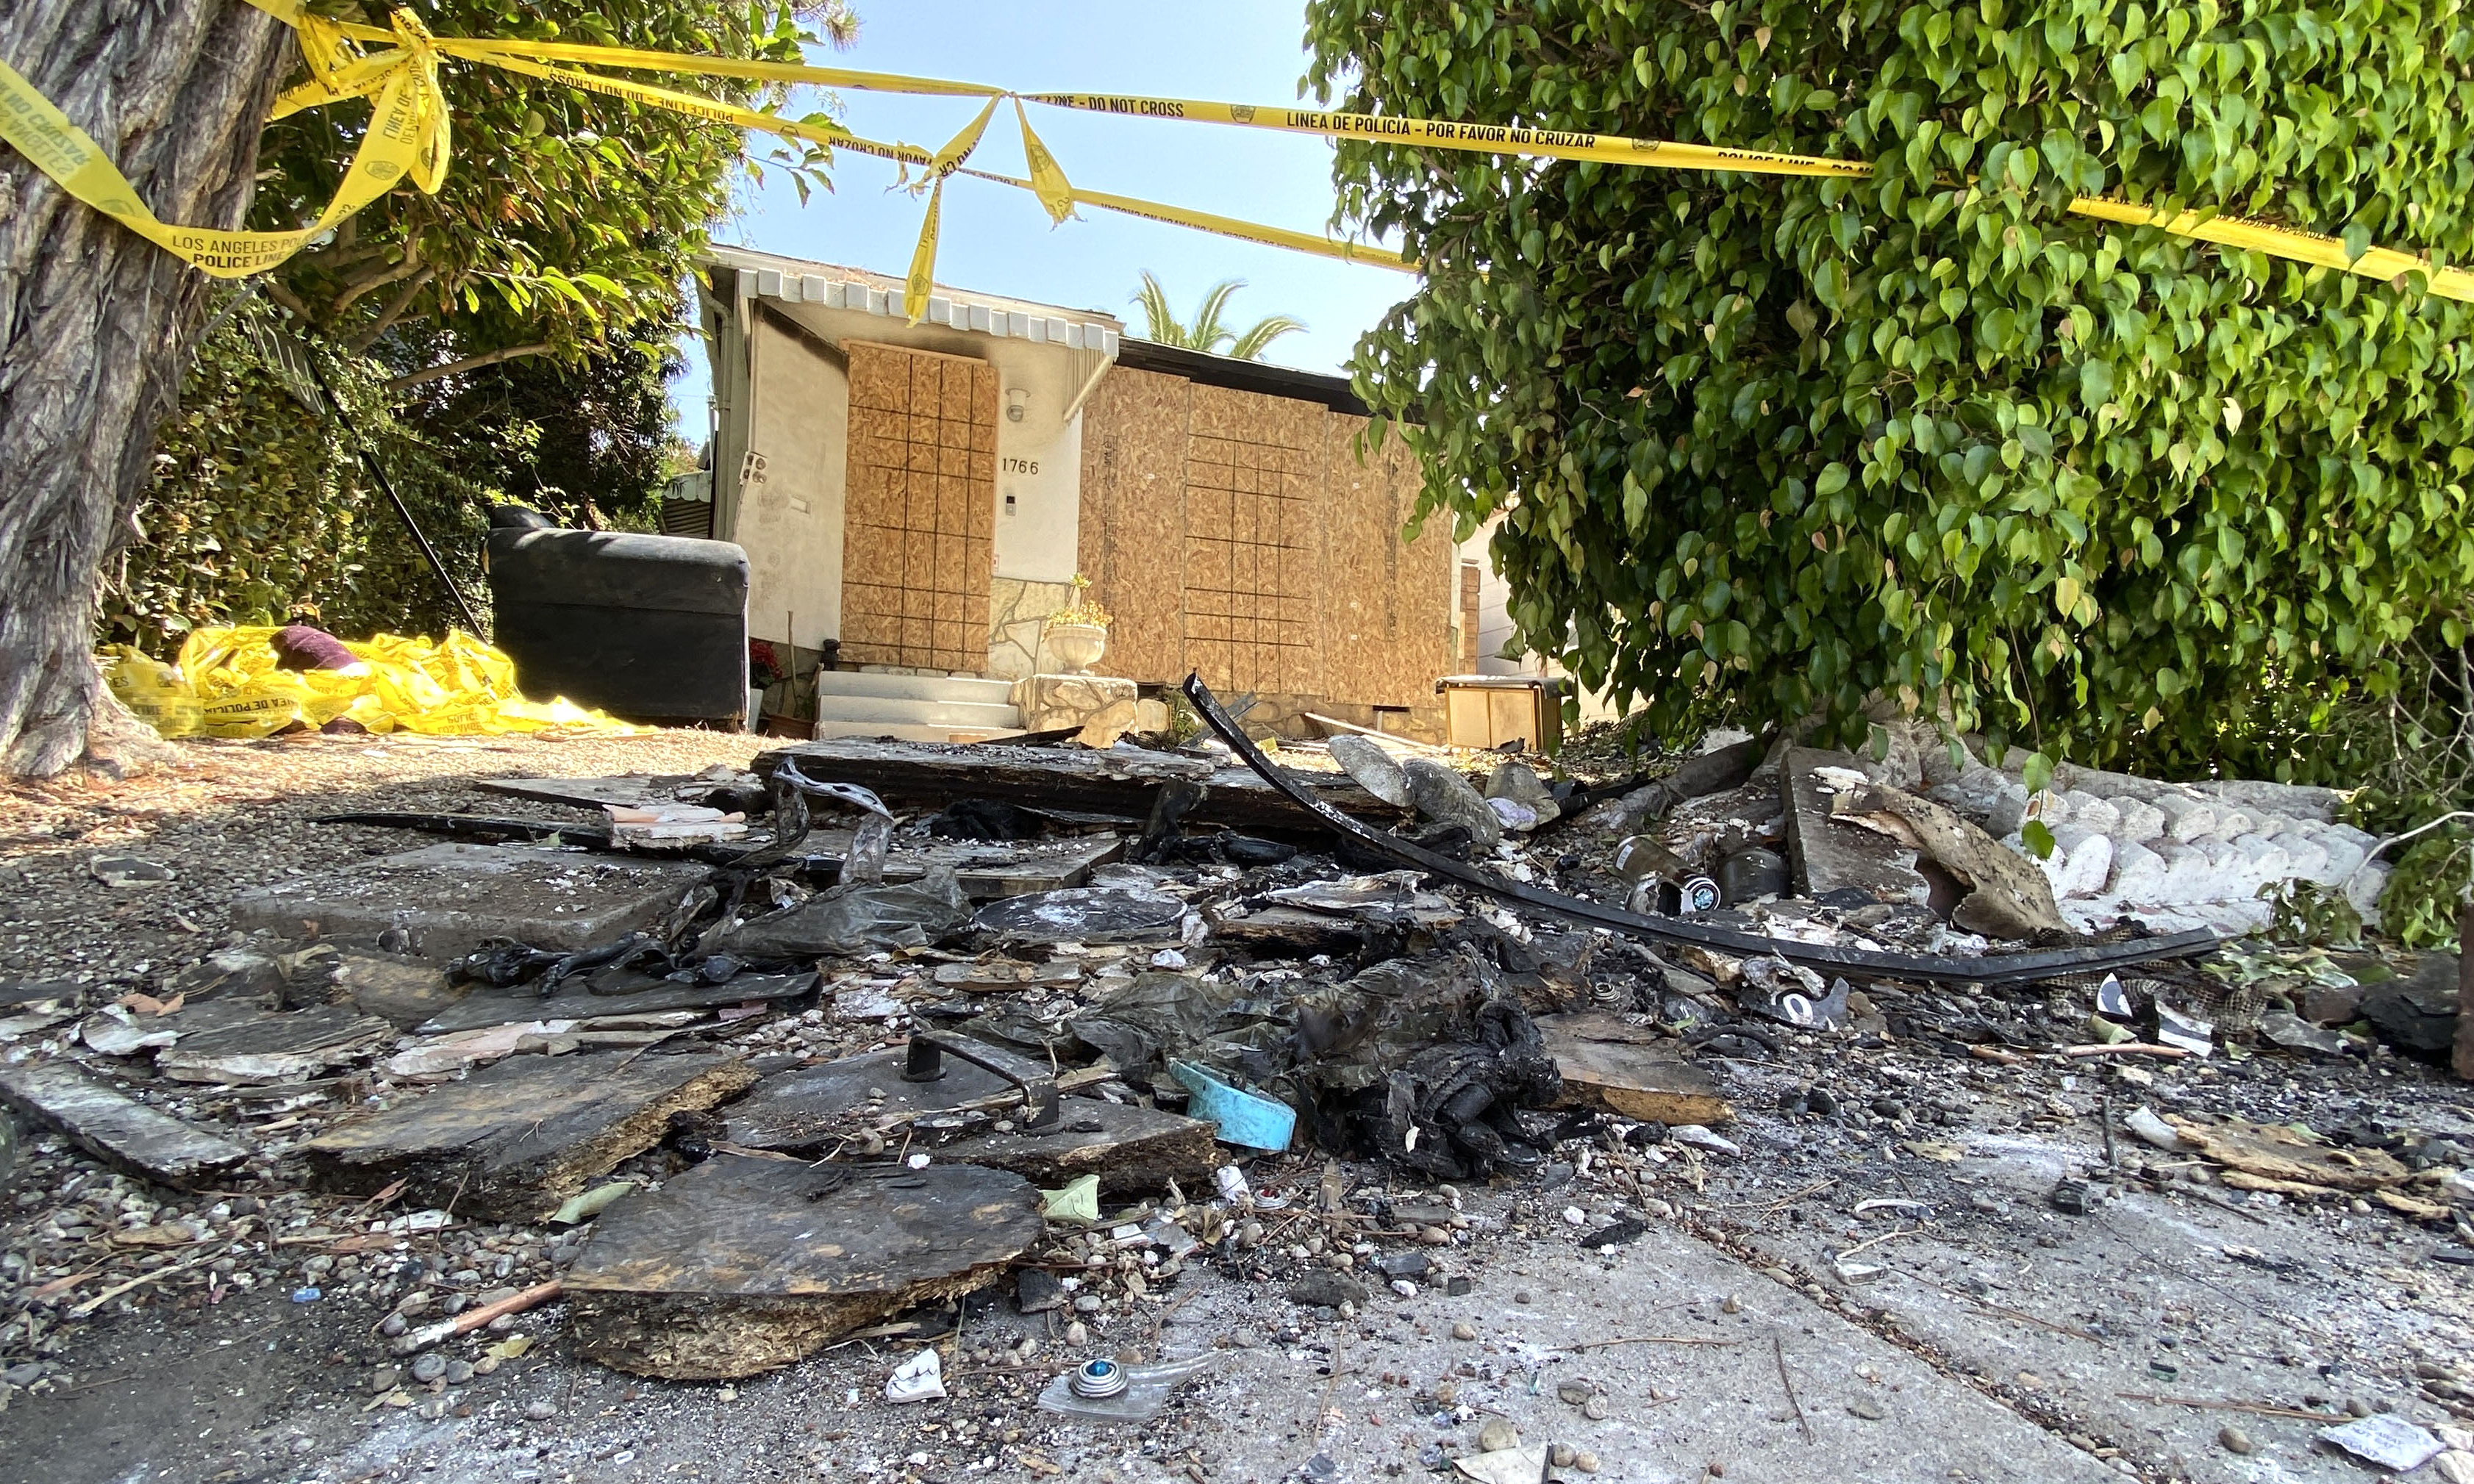 Charred debris and caution tape are seen at the site where US actress Anne Heche crashed into a home in Mar Vista, California.